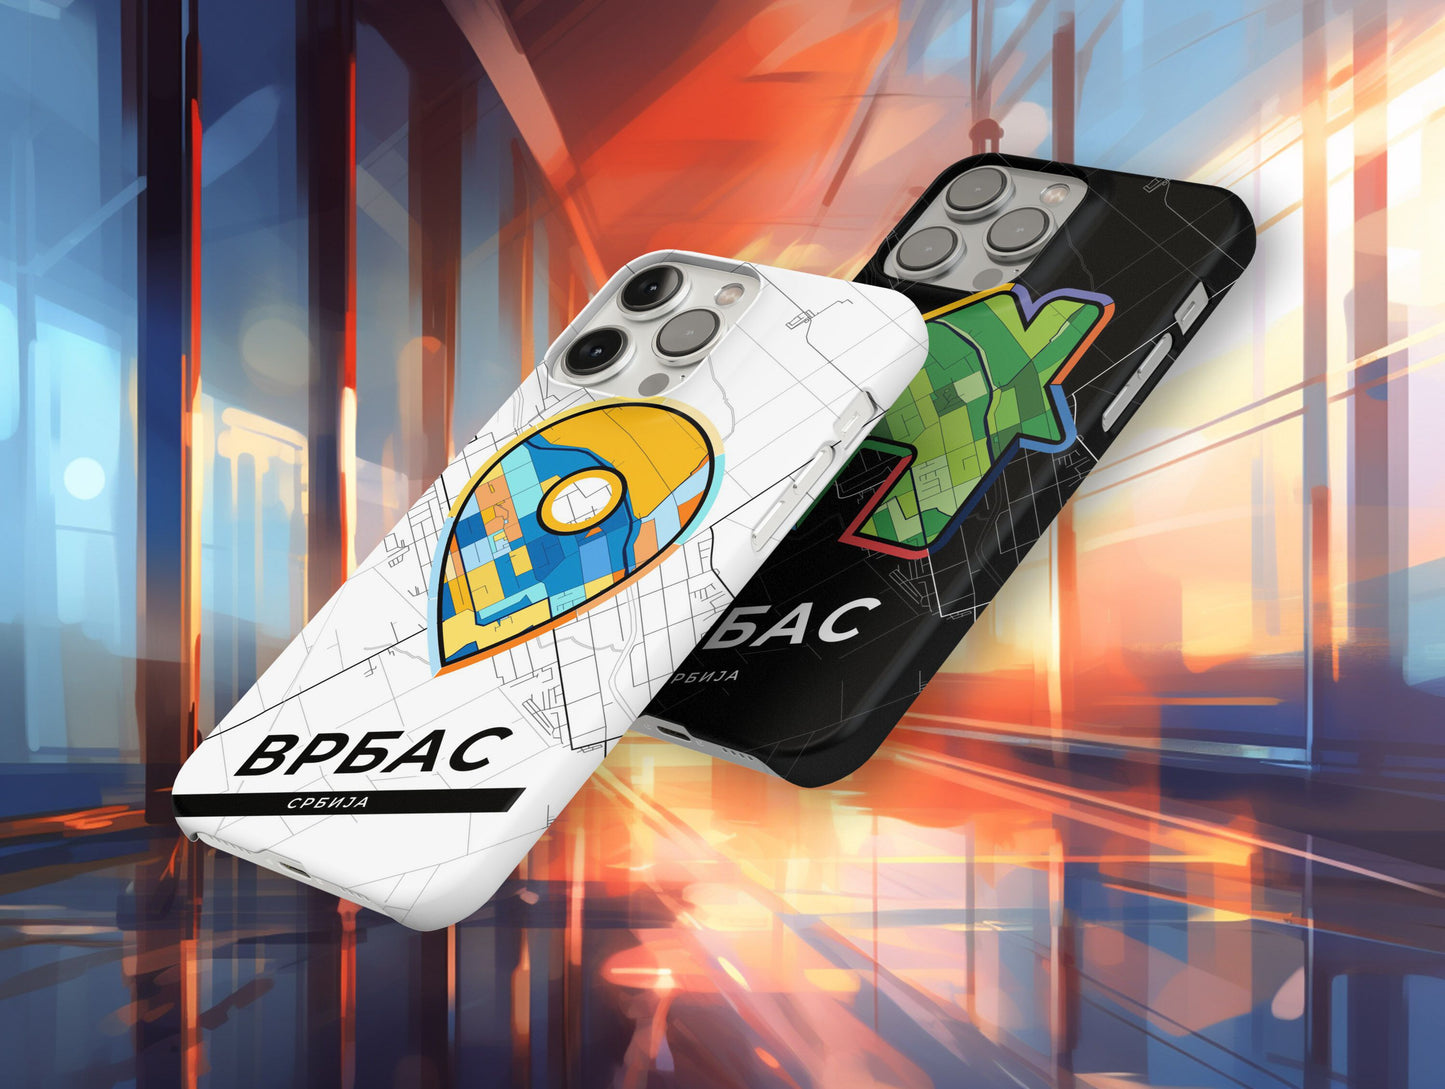 Vrbas Serbia slim phone case with colorful icon